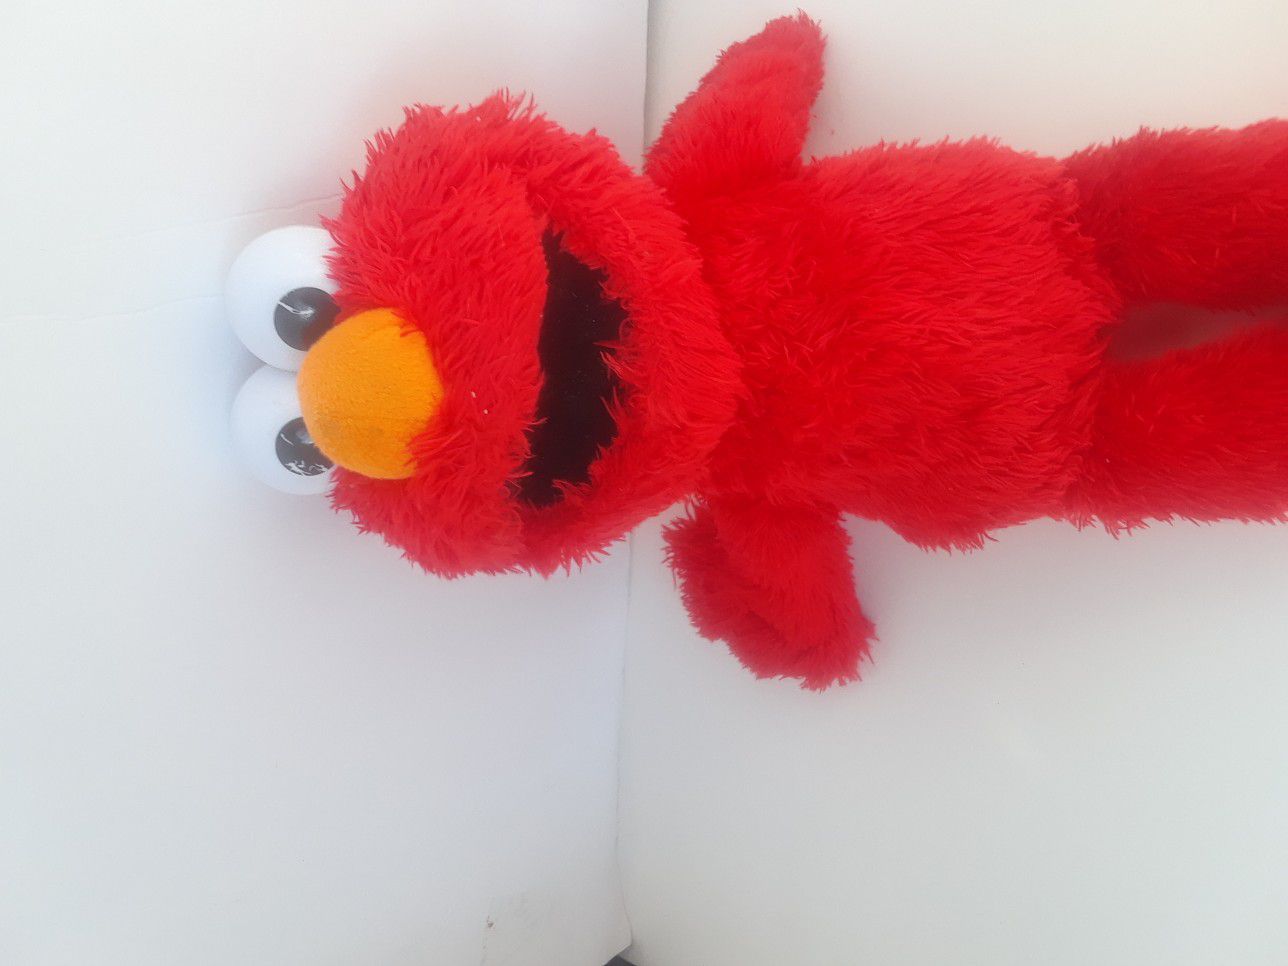 Tickle me Elmo that shakes and talks